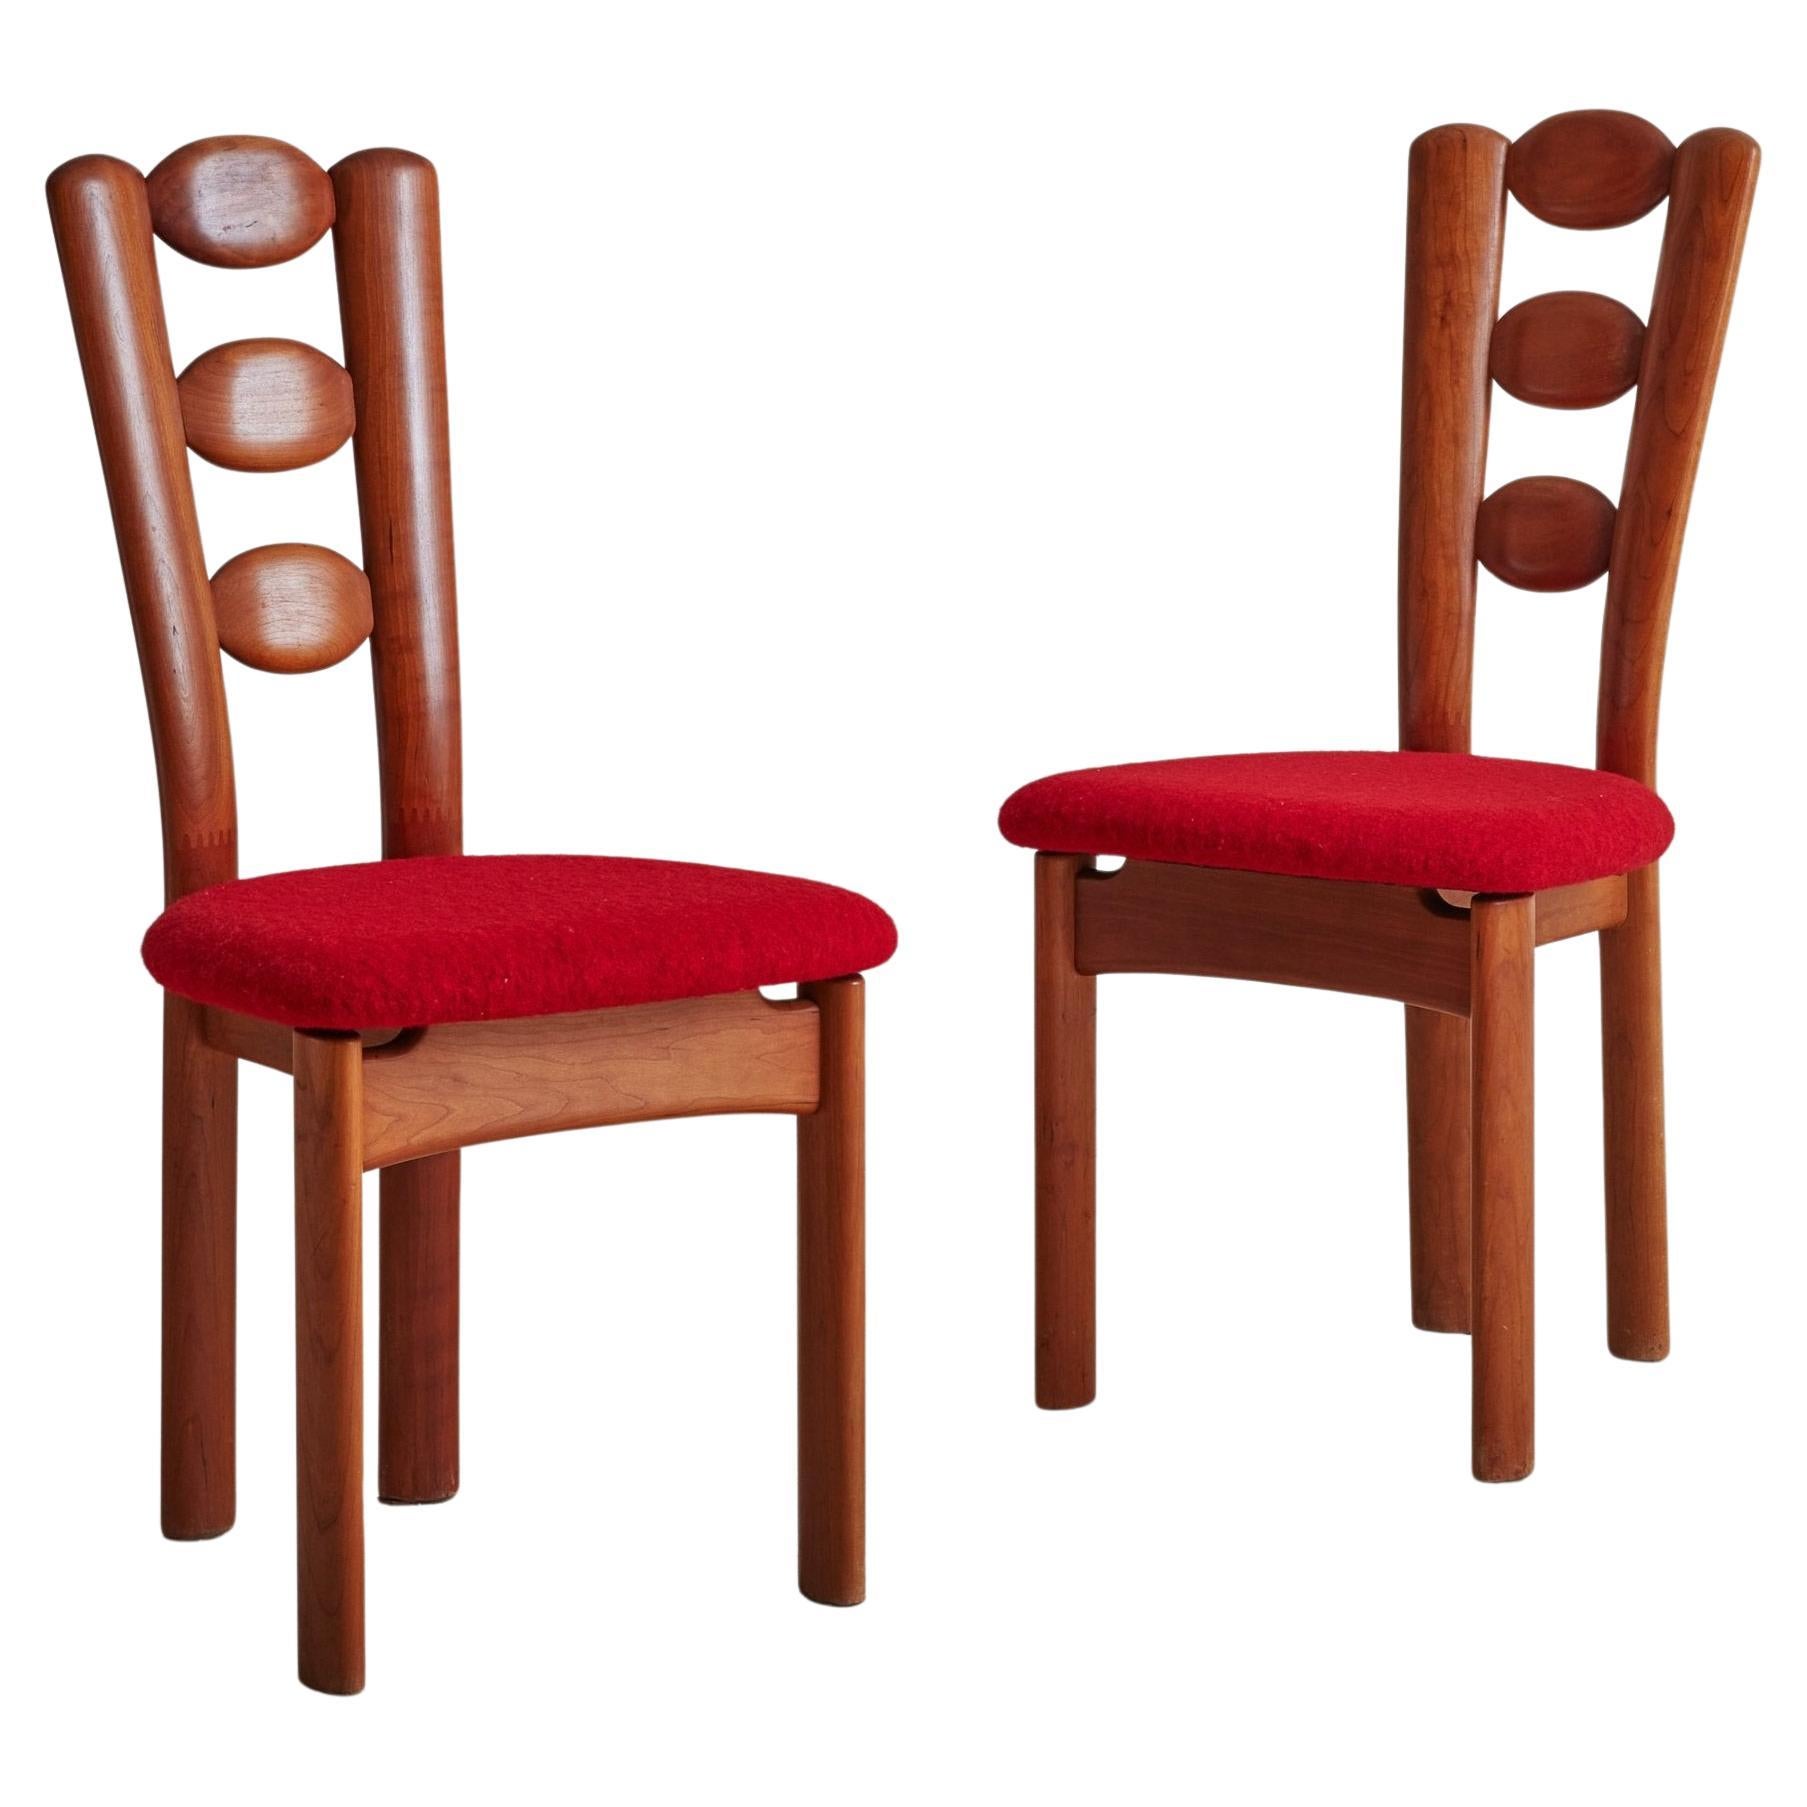 A fabulous set of 4 Danish dining chairs featuring beautifully grained teak wood frames with upholstered seats. The carved back legs of these chairs gracefully extend and arch upwards to frame three floating ovals, which composes the seat back. The